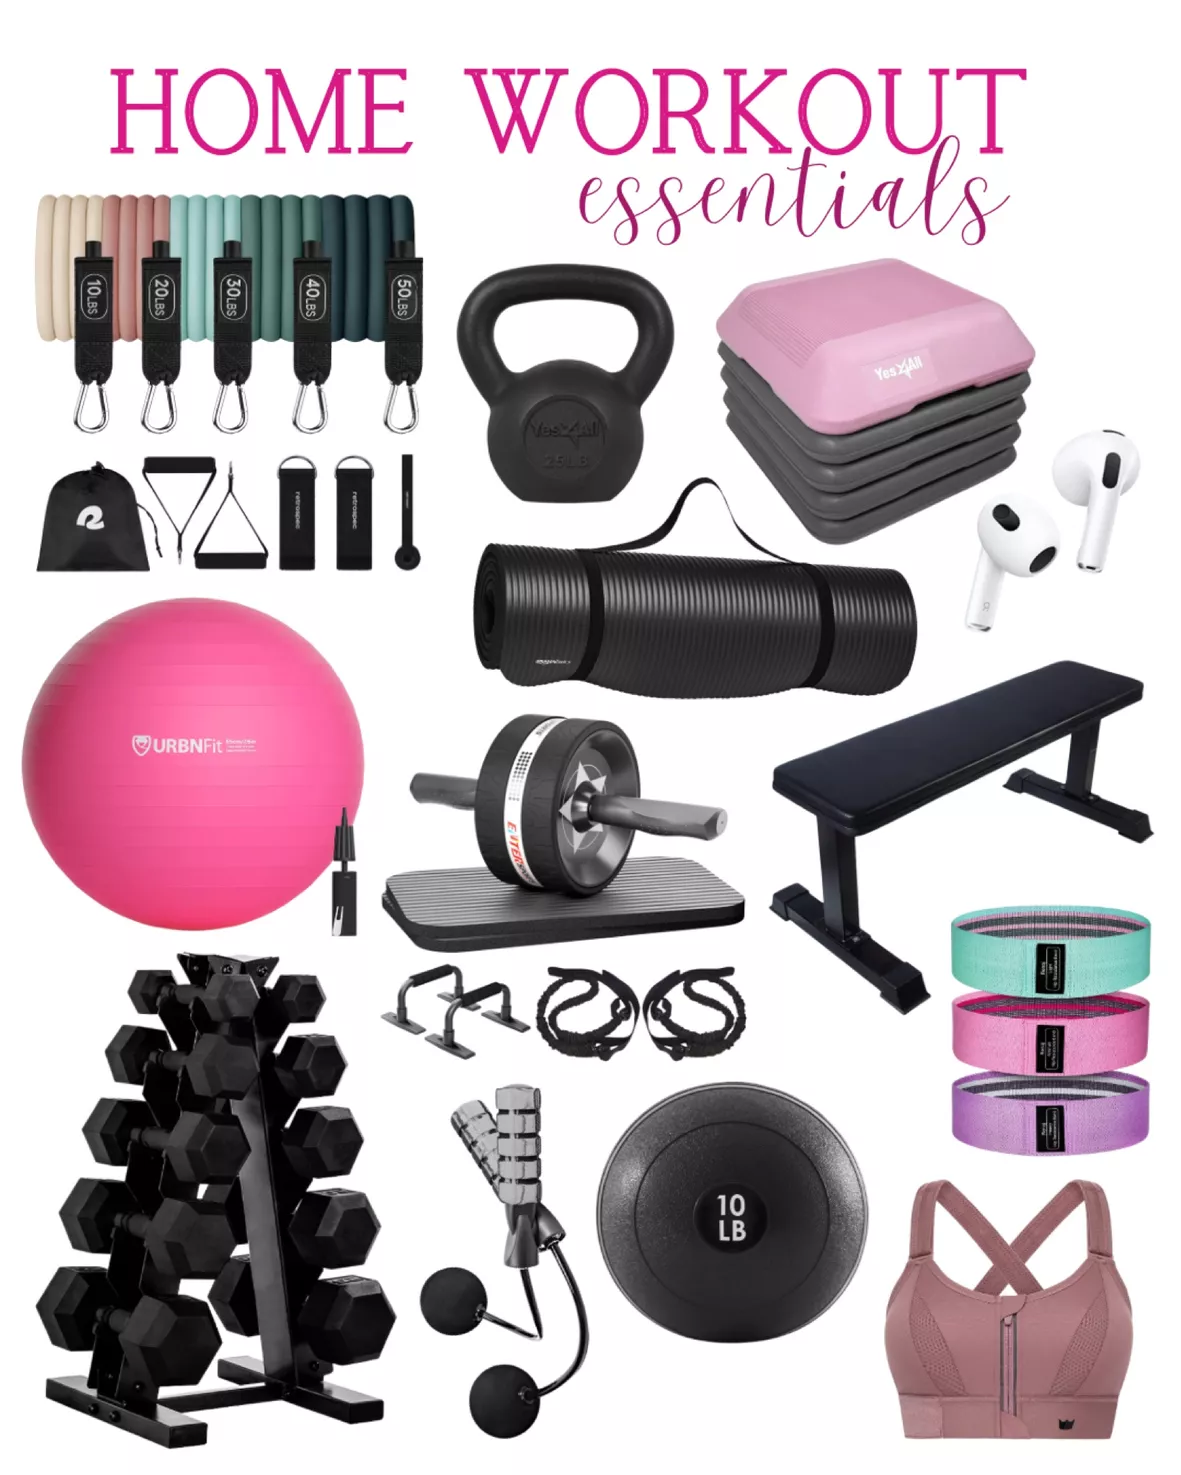 Home workout: Our kit essentials for everything from weights to